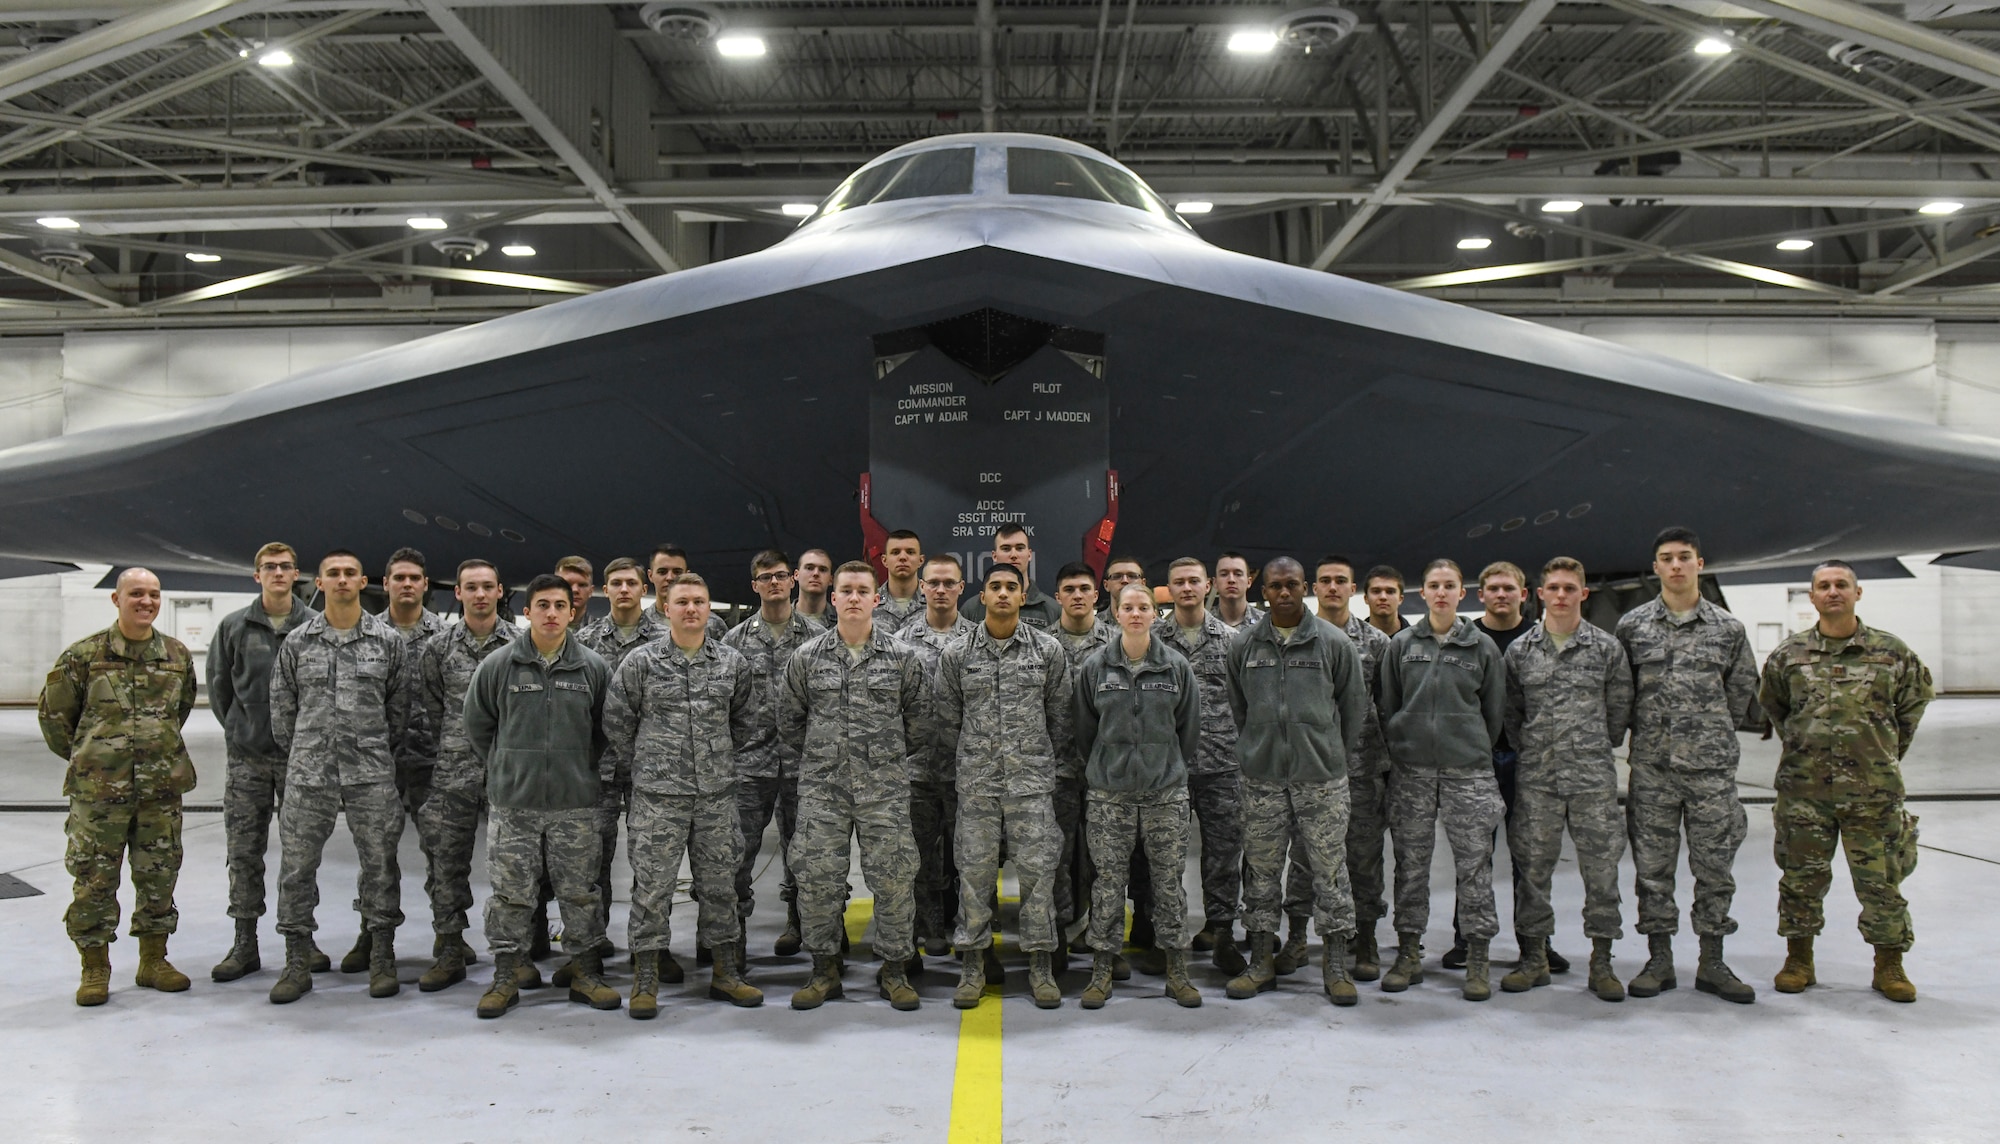 Indiana State University Indiana, Detachment 218 Air Force Reserve Officer Training Corps cadets stand in front of a B-2 Spirit Stealth Bomber during a tour at Whiteman Air Force Base, Mo., Mar. 4, 2020. The 28 cadets learned about what it takes to be a pilot and operate the Air Force’s premiere stealth airframe—the B-2 Spirit Stealth Bomber. (U.S. Air Force photo by Staff Sgt. Sadie Colbert)